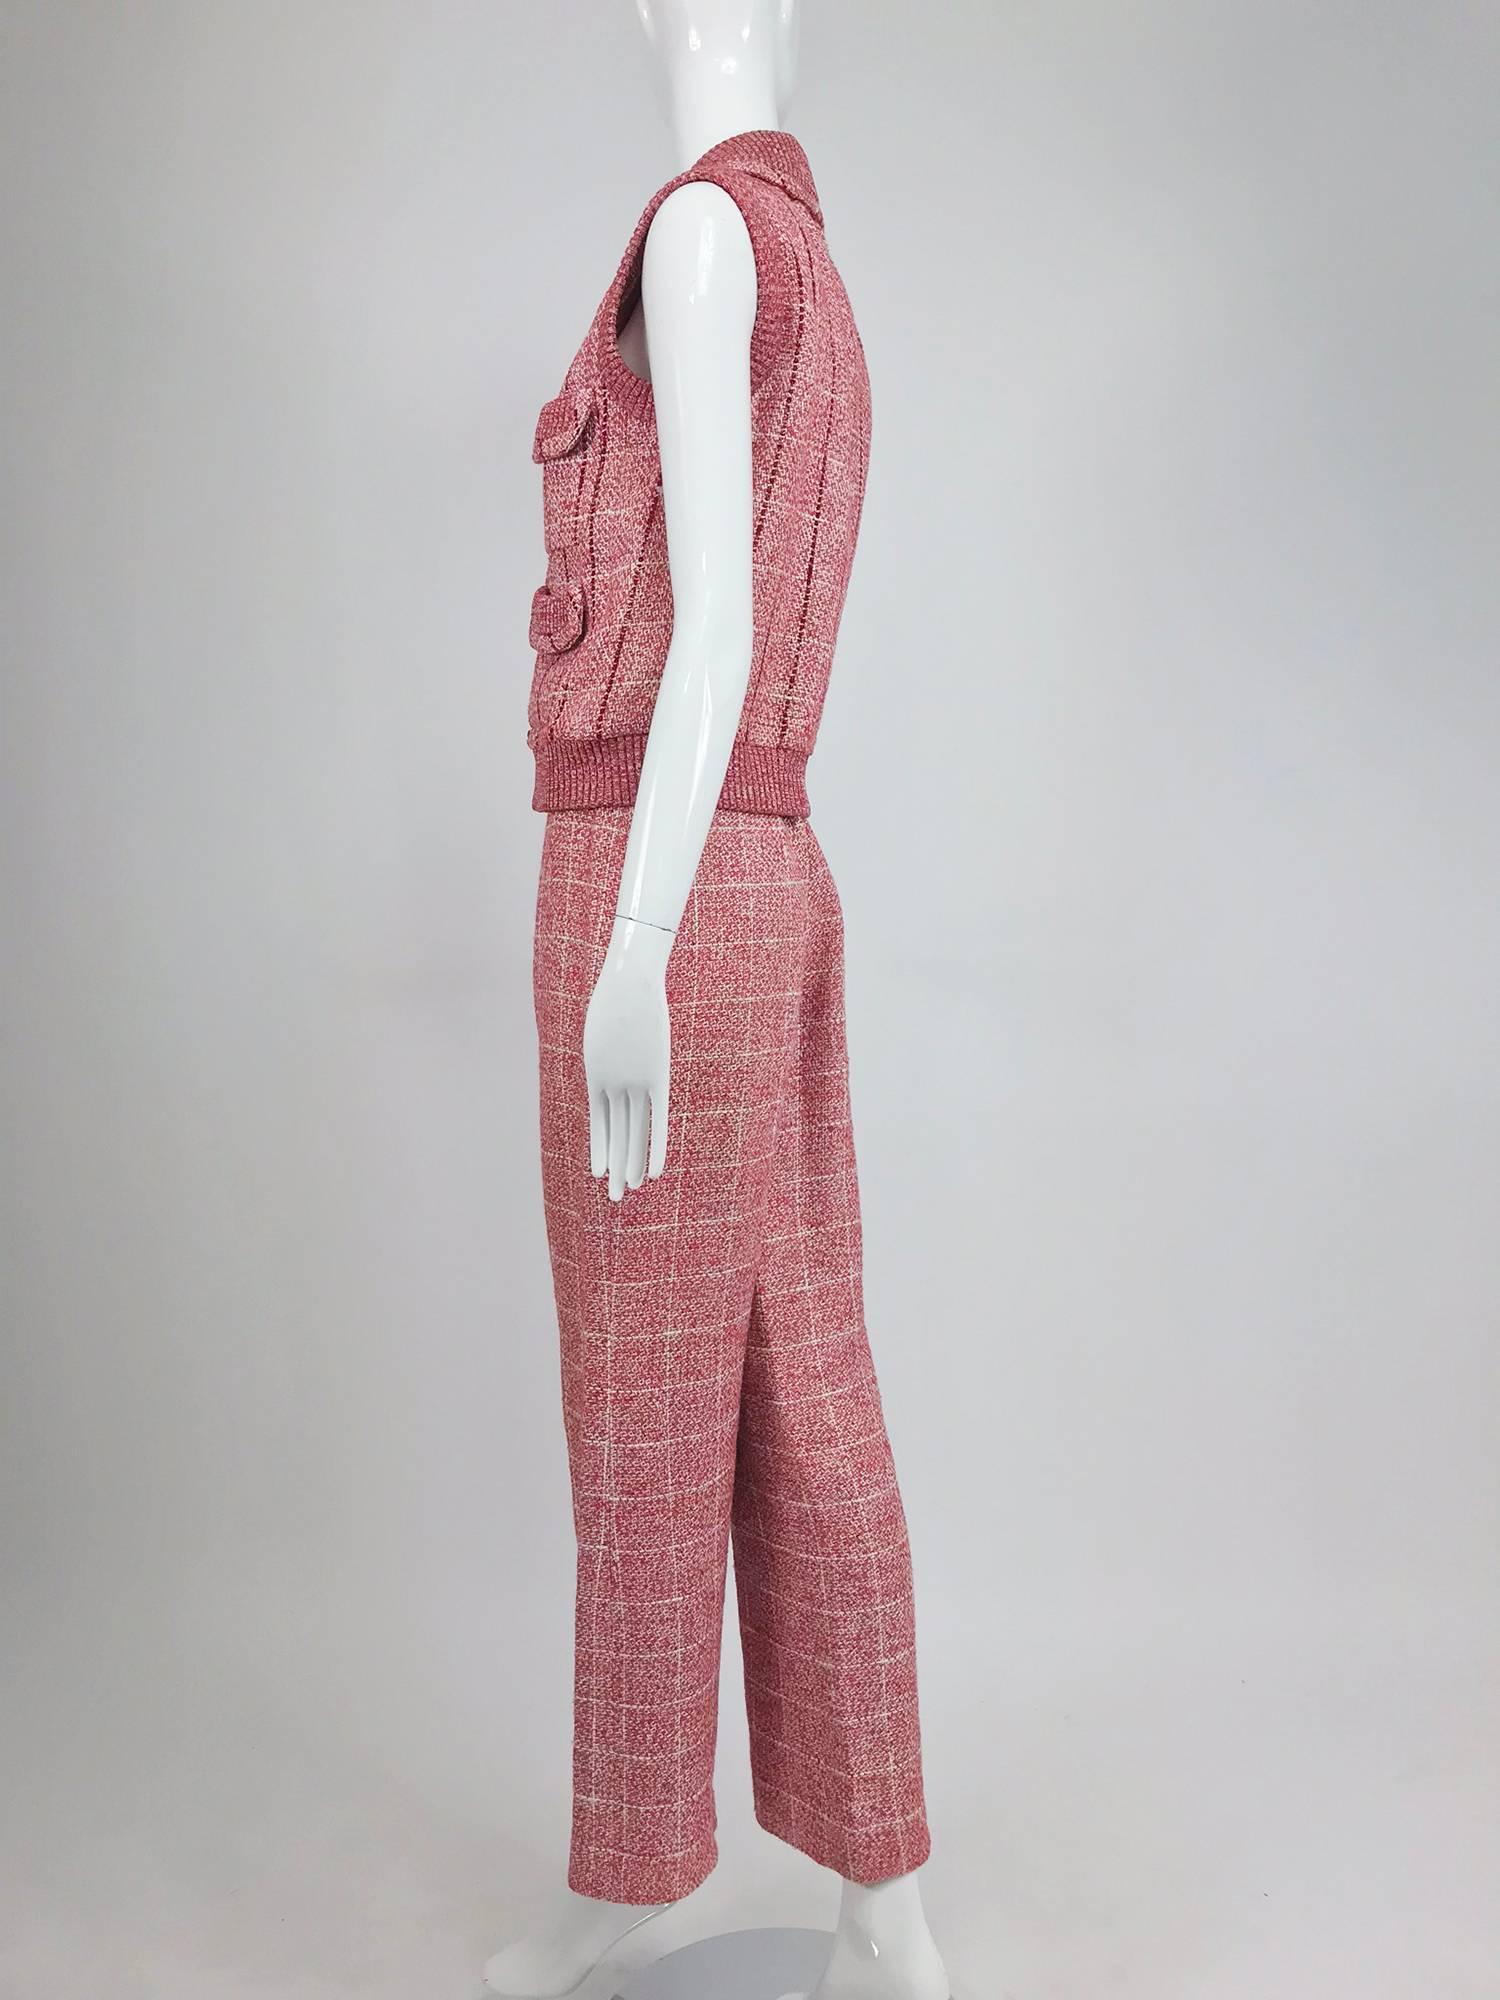 Women's Chanel red and white plaid sequin vest and trouser set 2001P